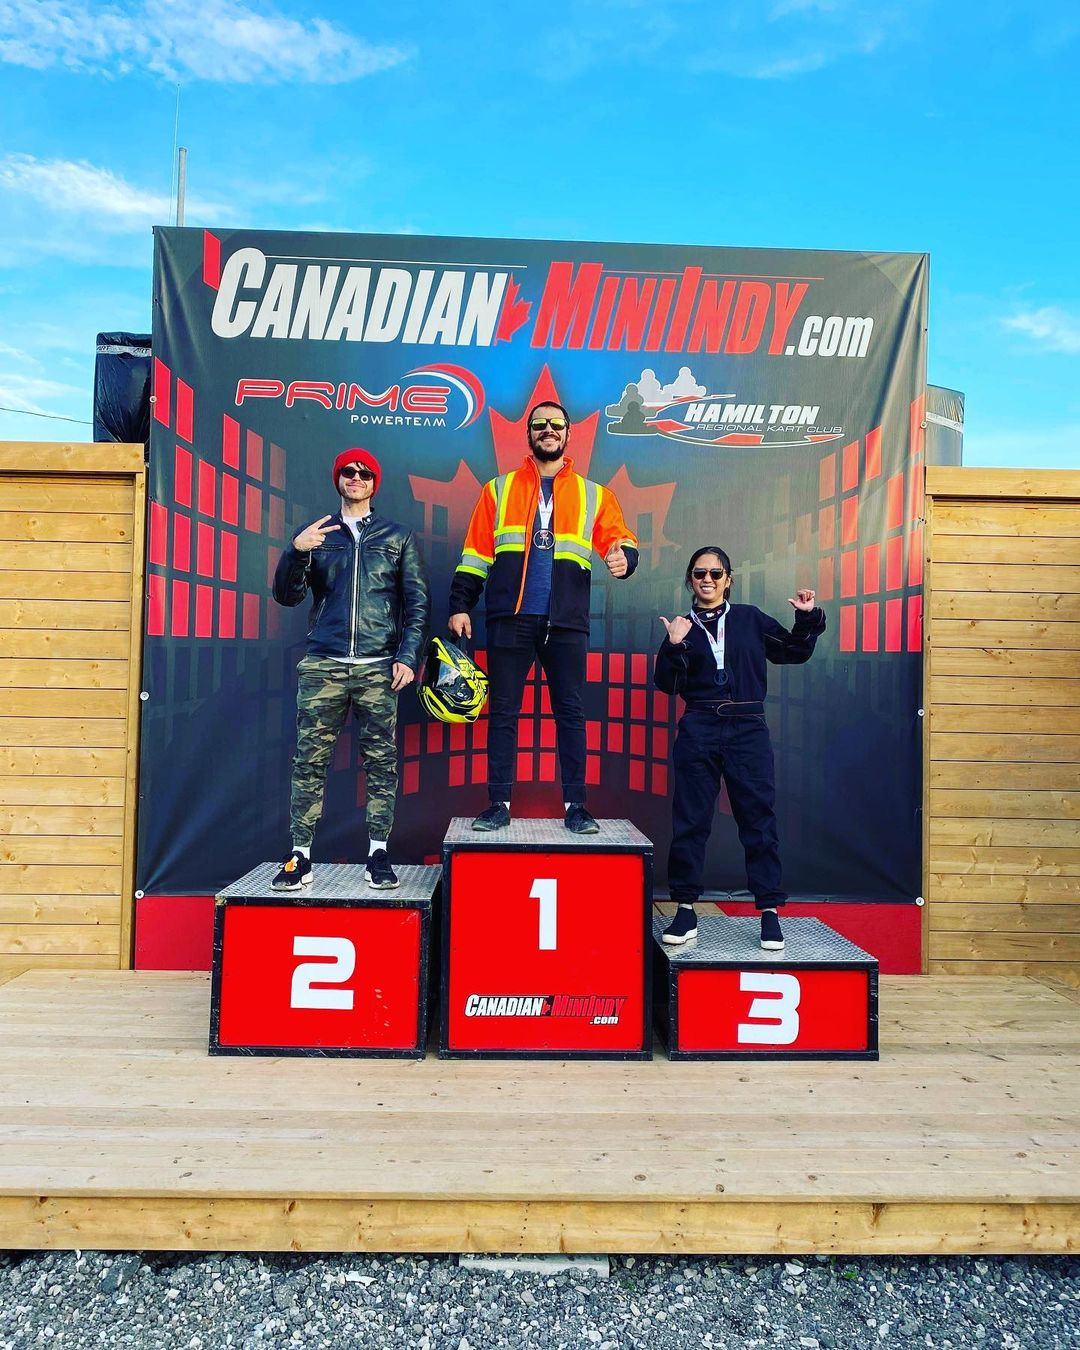 Photo of podium celebrations after a race at the Canadian Mini Indy